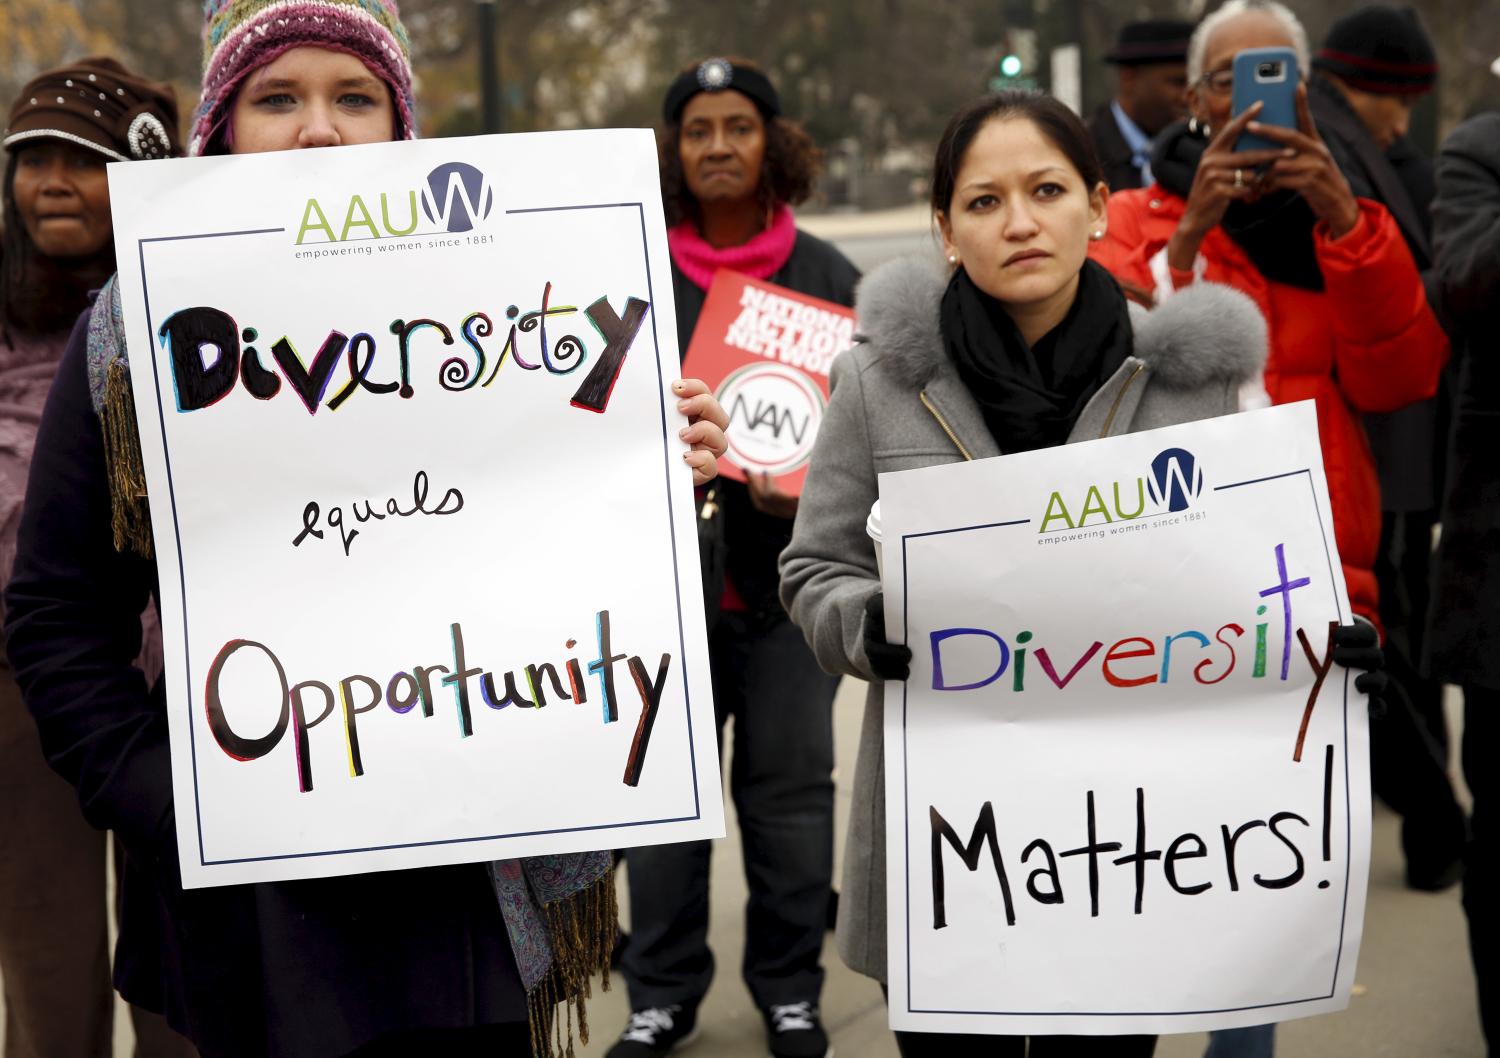 Demonstrators take part in a rally at the U.S. Supreme Court as the affirmative action in university admissions case was being heard at the court in Washington December 9, 2015. The Court was hearing arguments on Wednesday over race-based admissions at the University of Texas in a highly charged dispute that could reverberate nationwide. The justices revisited the case of Abigail Fisher, a 25-year-old white woman rejected for admission by the flagship campus in Austin in 2008. She argued that a University of Texas affirmative-action policy unconstitutionally favored blacks and Hispanics. REUTERS/Kevin Lamarque